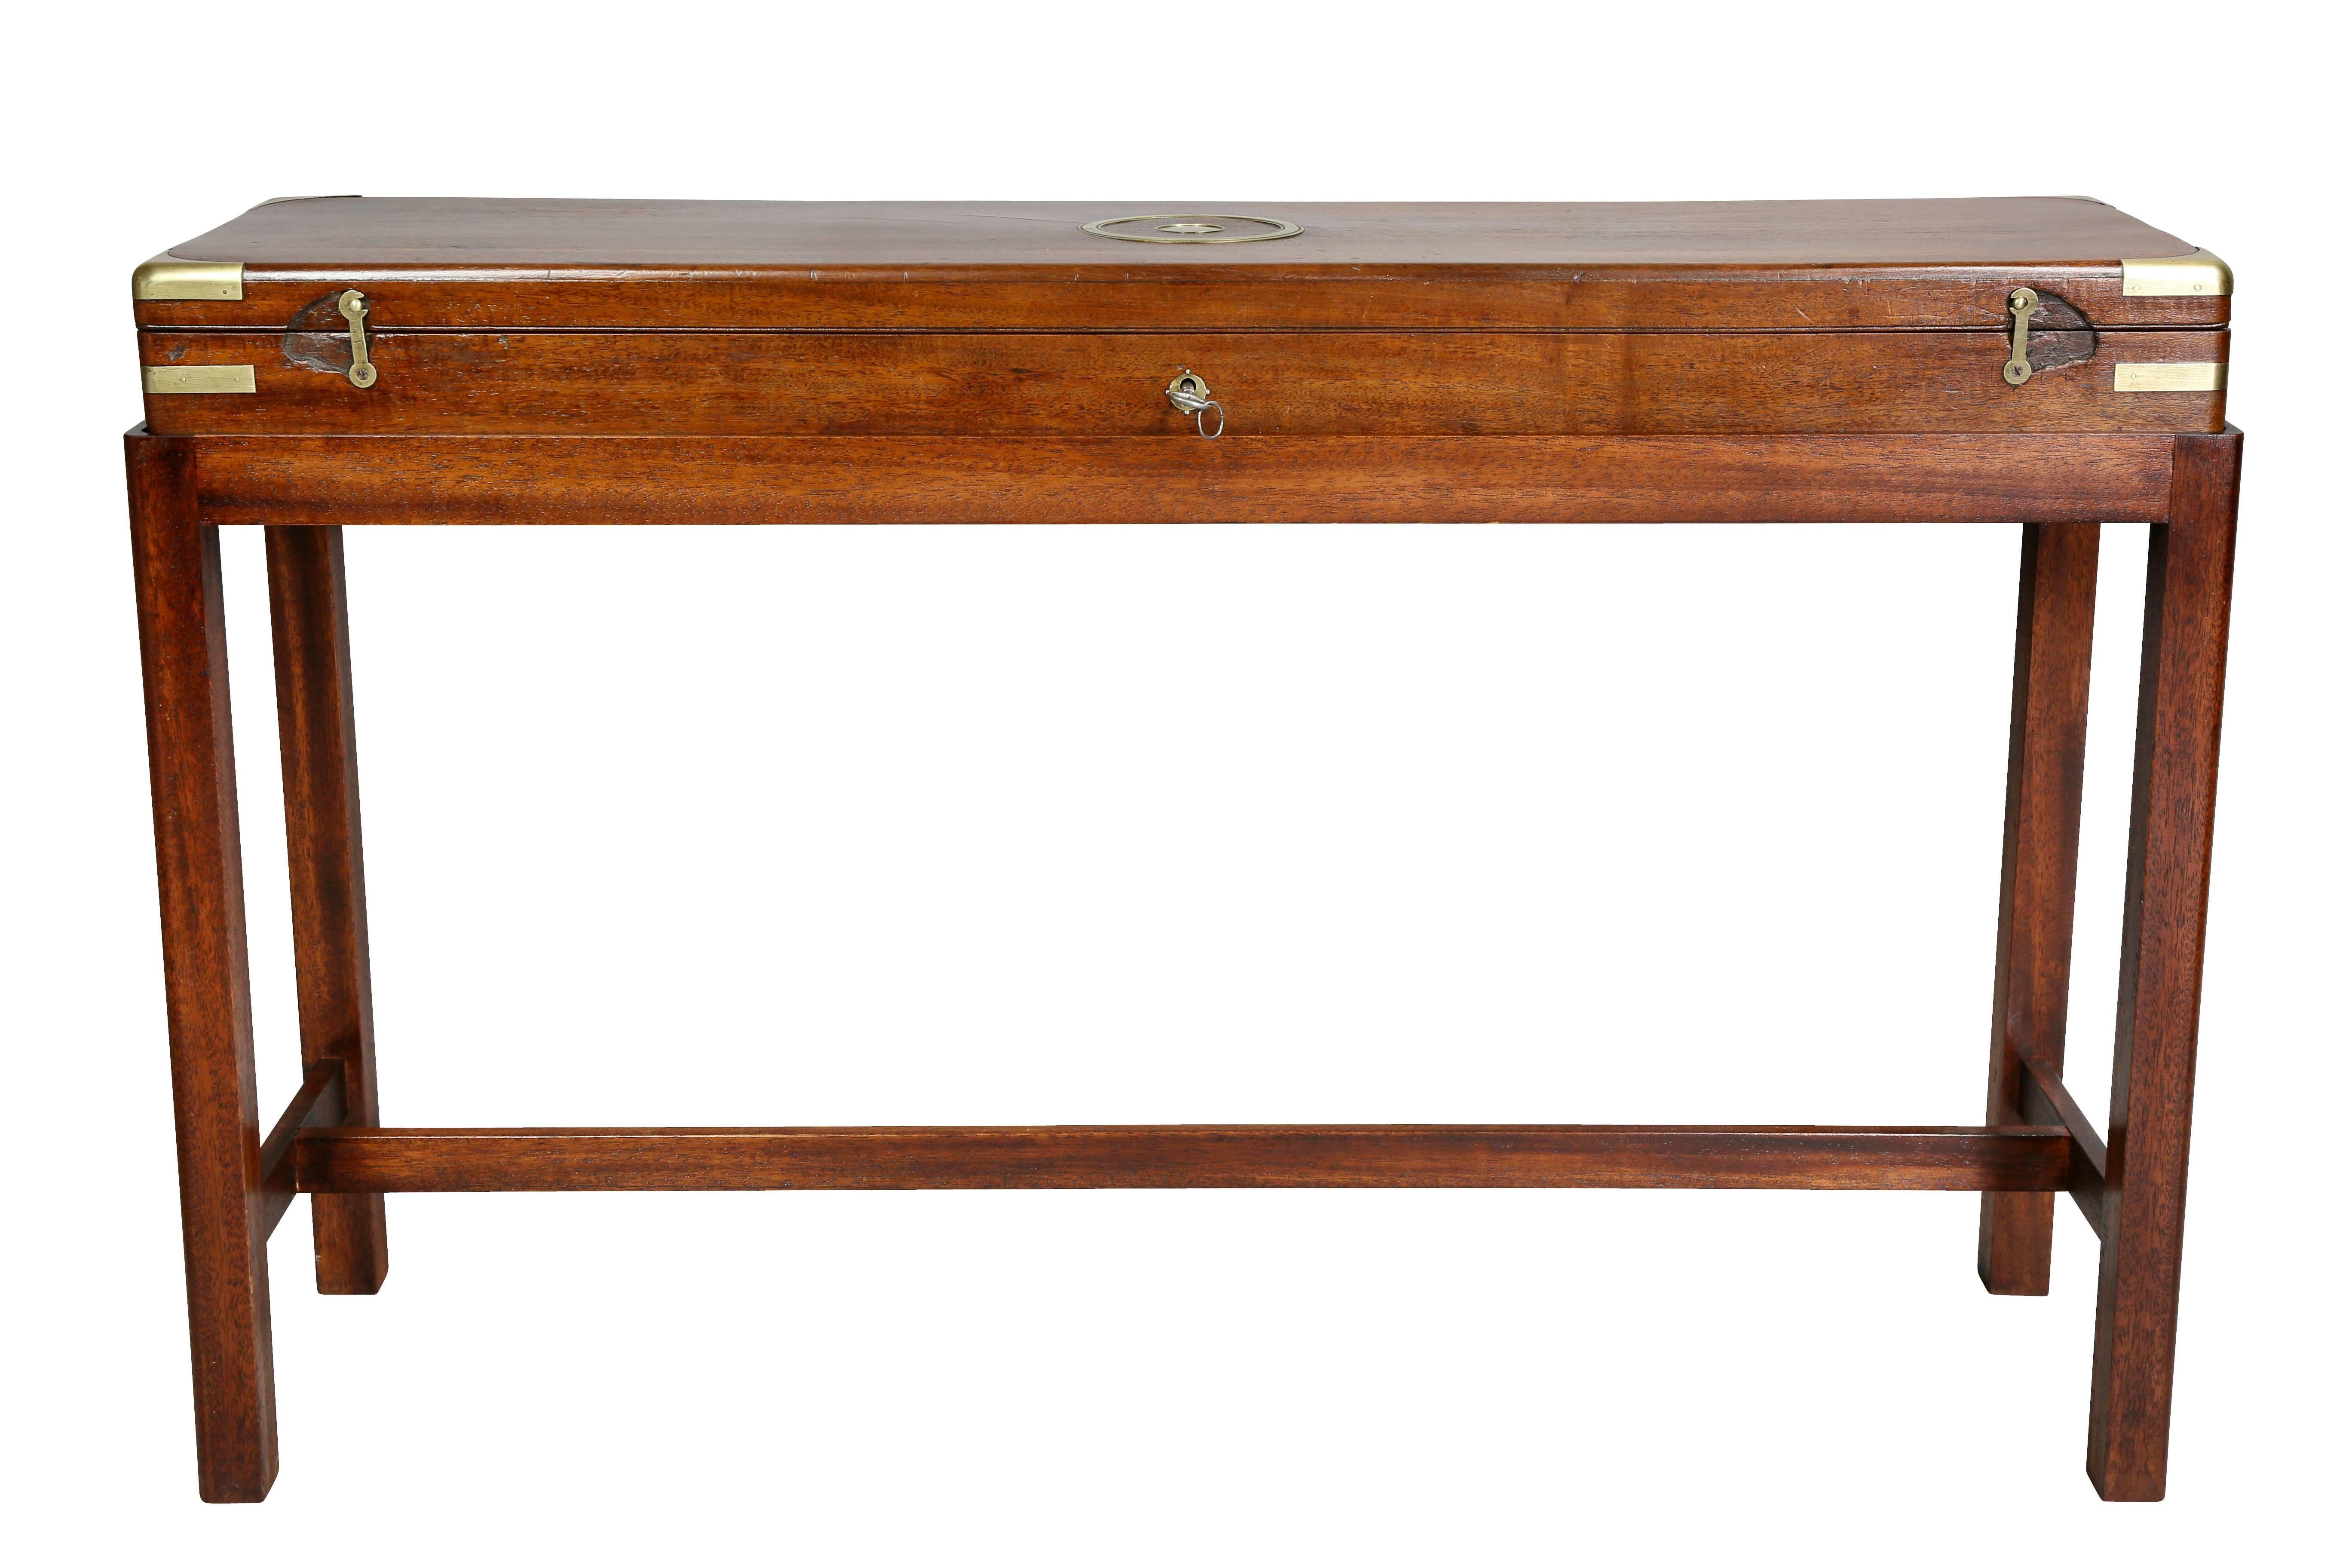 Hinged top opening to a felt lined fitted interior with a gun. Raised on a later mahogany base.